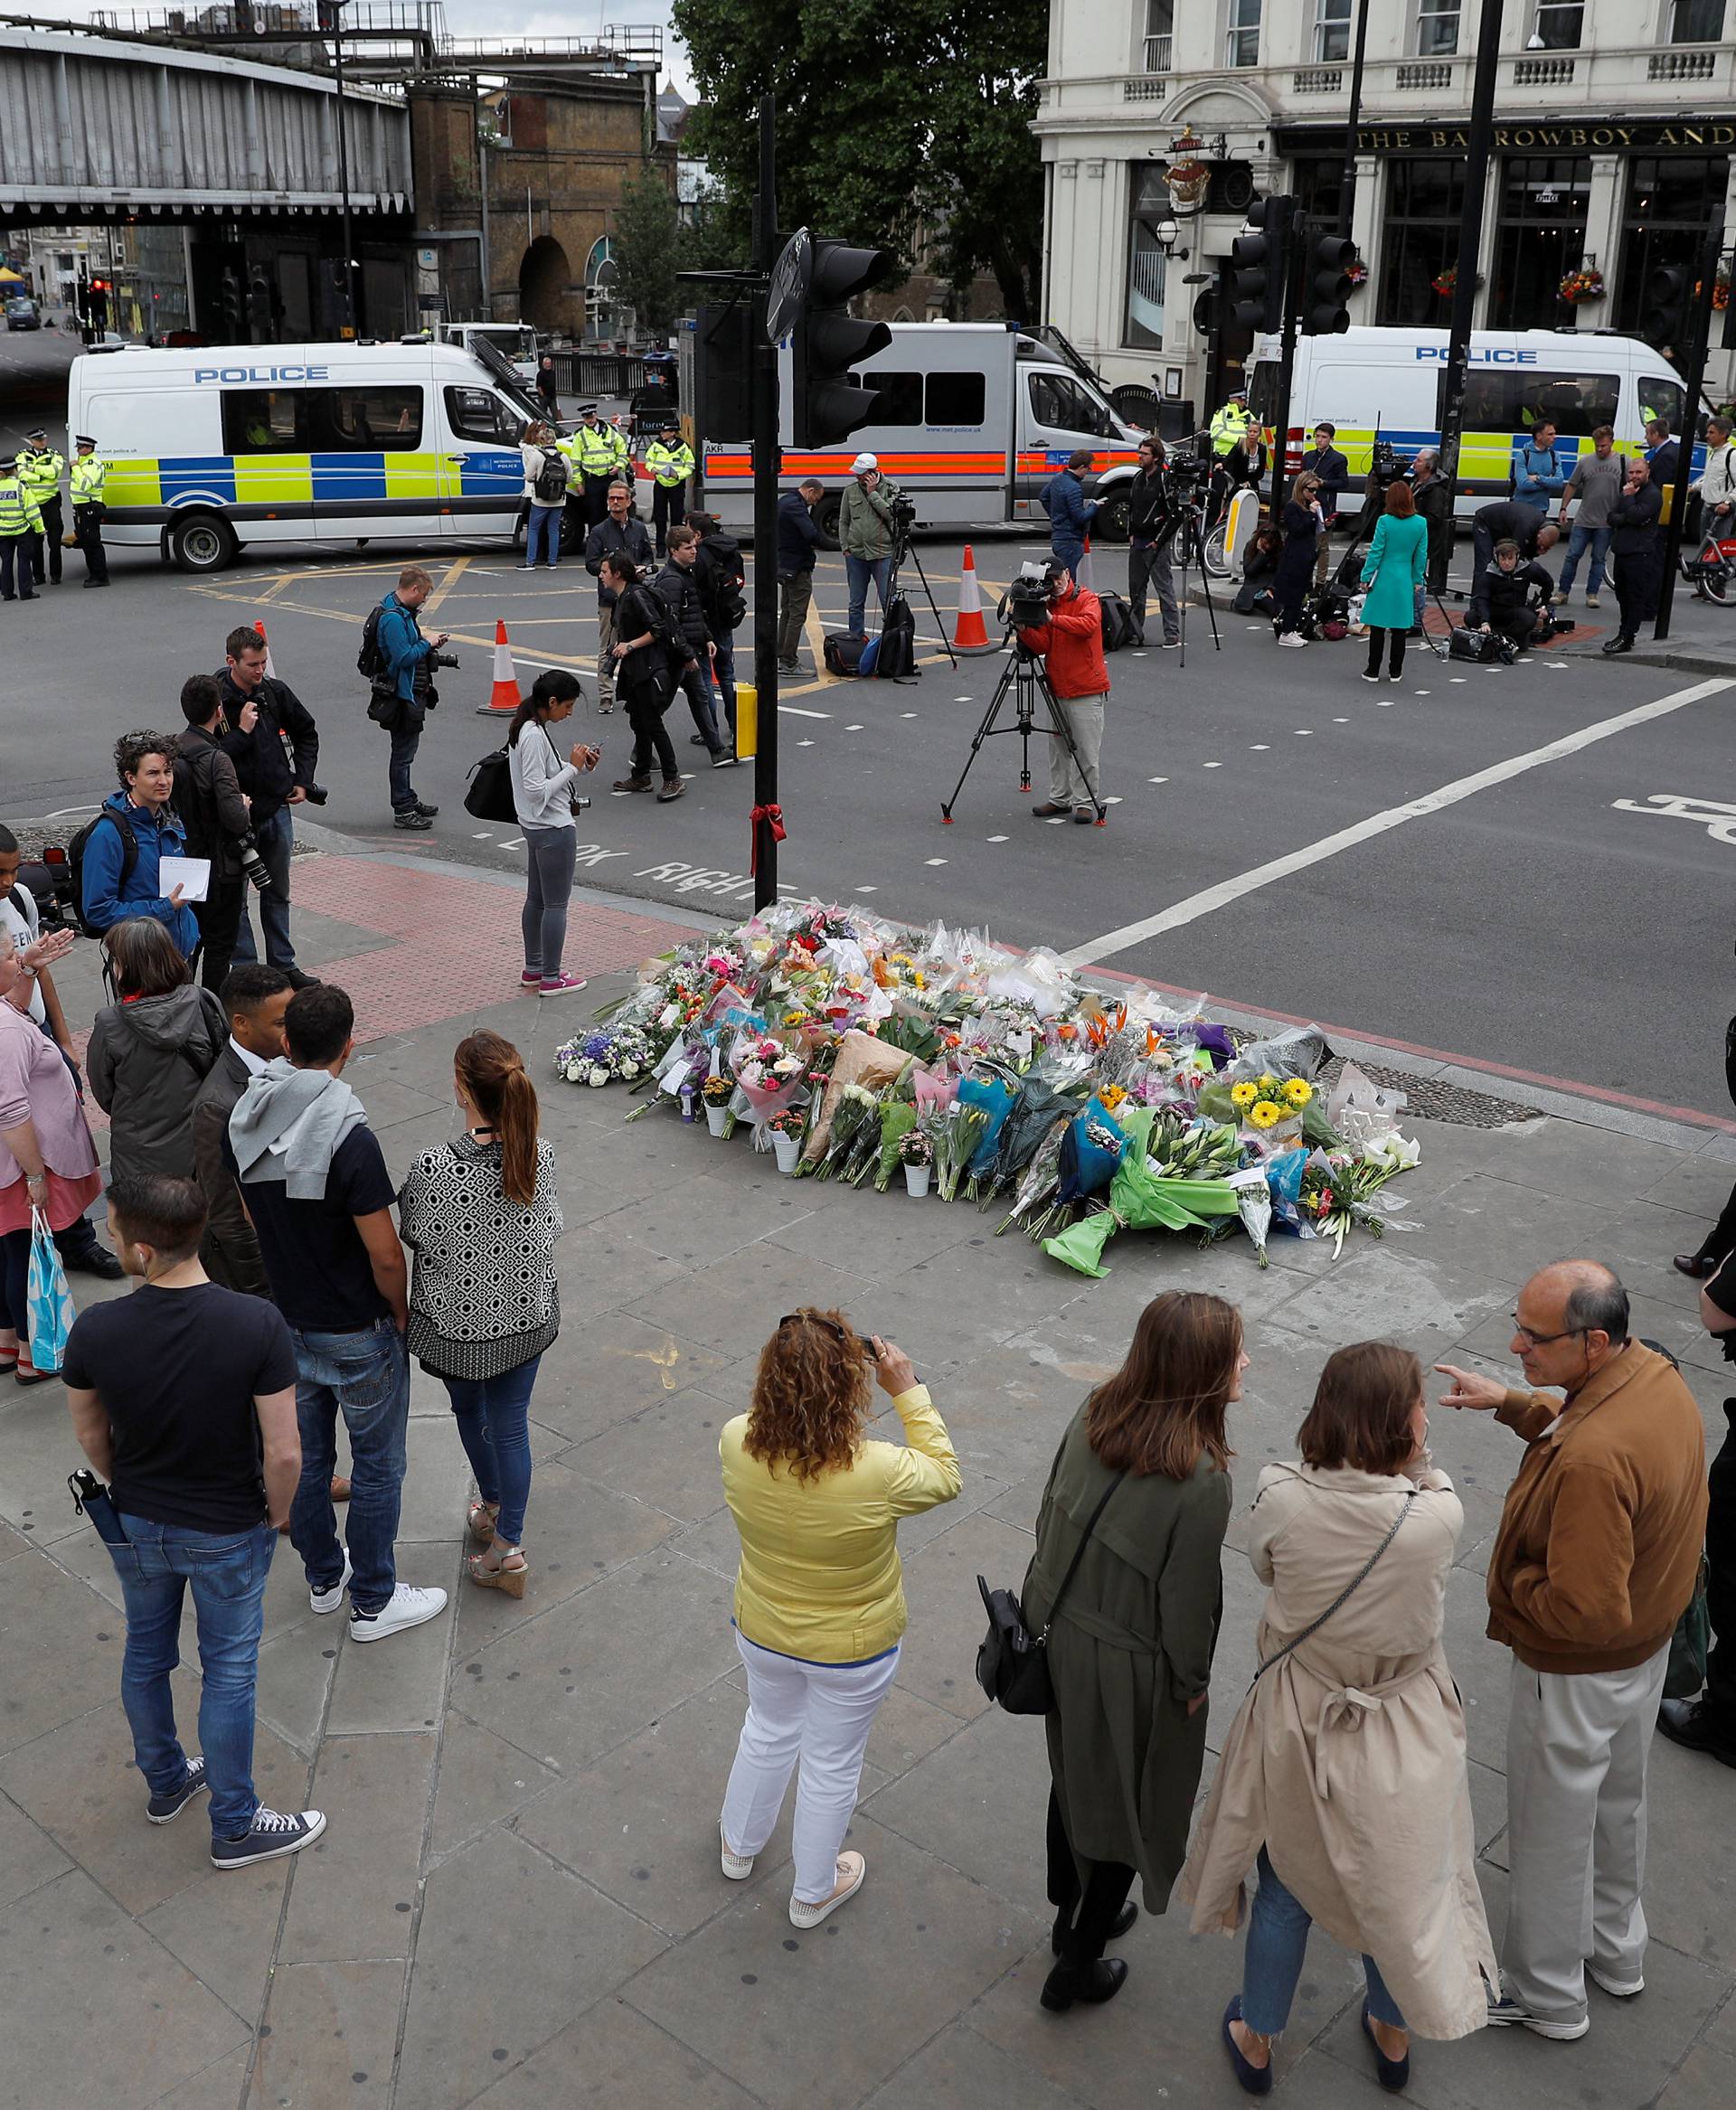 People stand around floral tributes on the south side of London Bridge near Borough Market after an attack left 7 people dead and dozens of injured in London